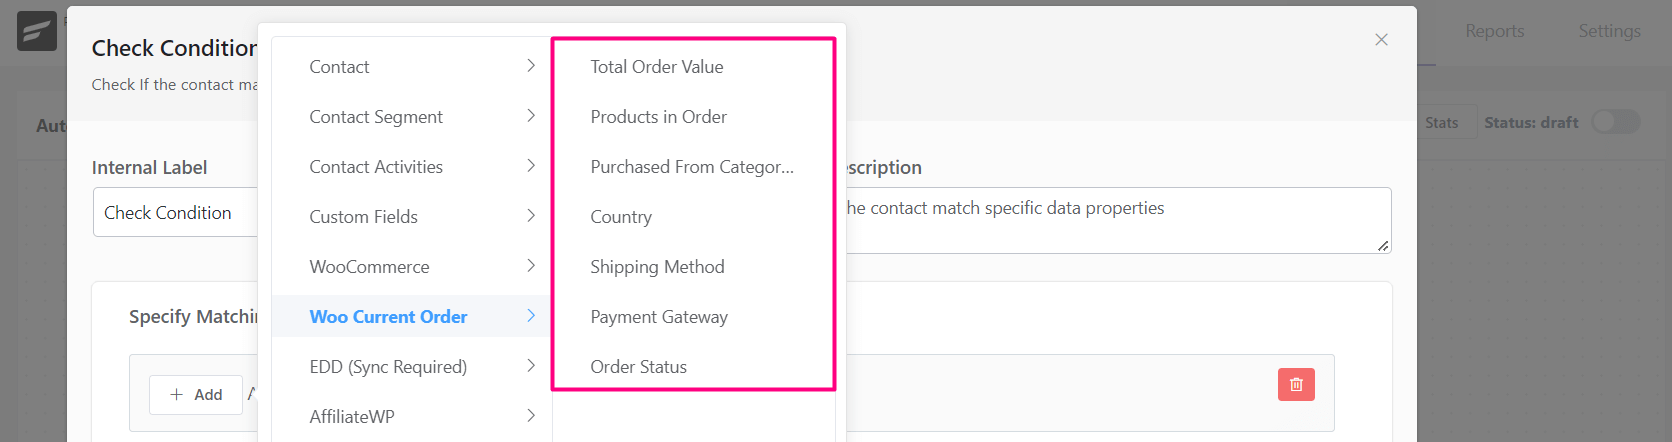 crm action conditional woo current order